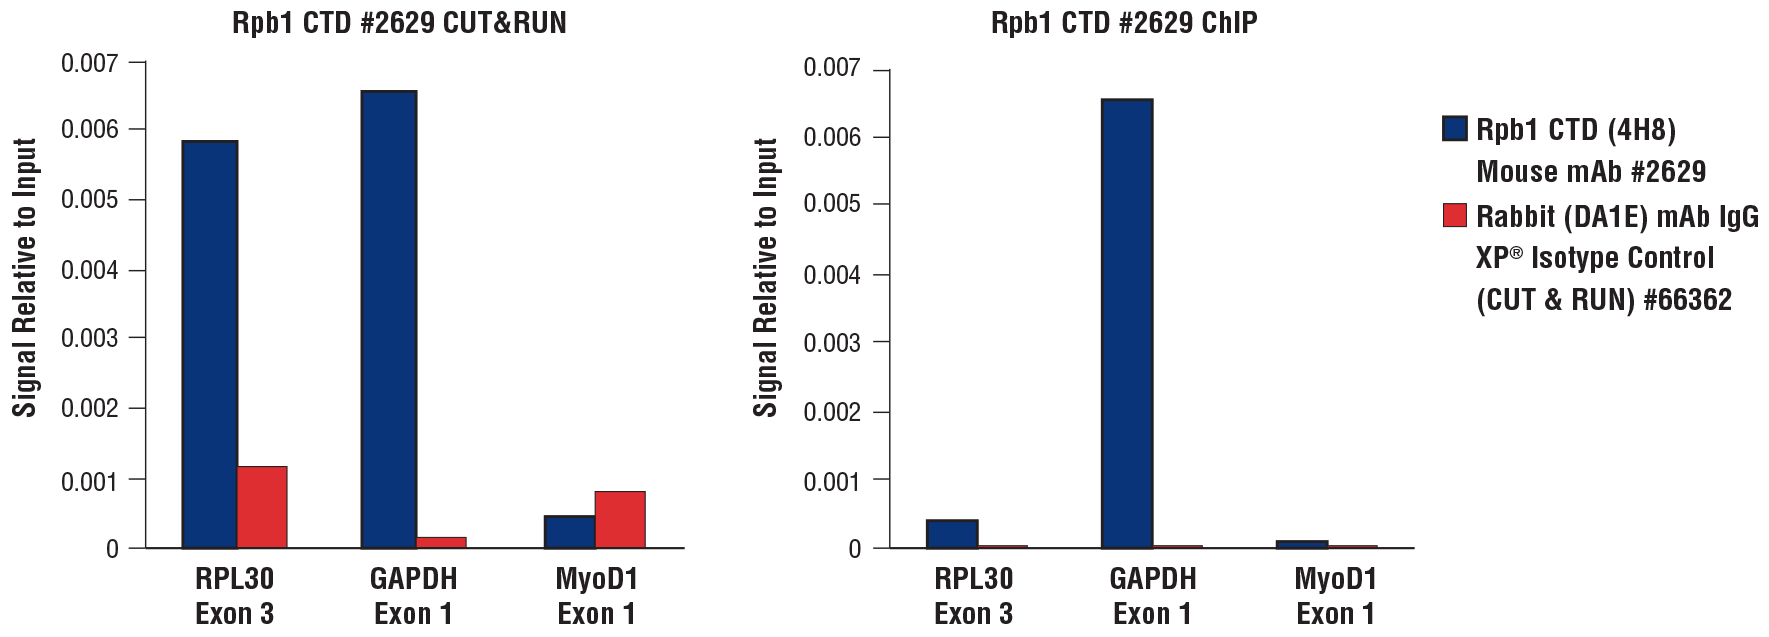 Rpb1 CTD qPCR results for CUT&RUN and ChIP